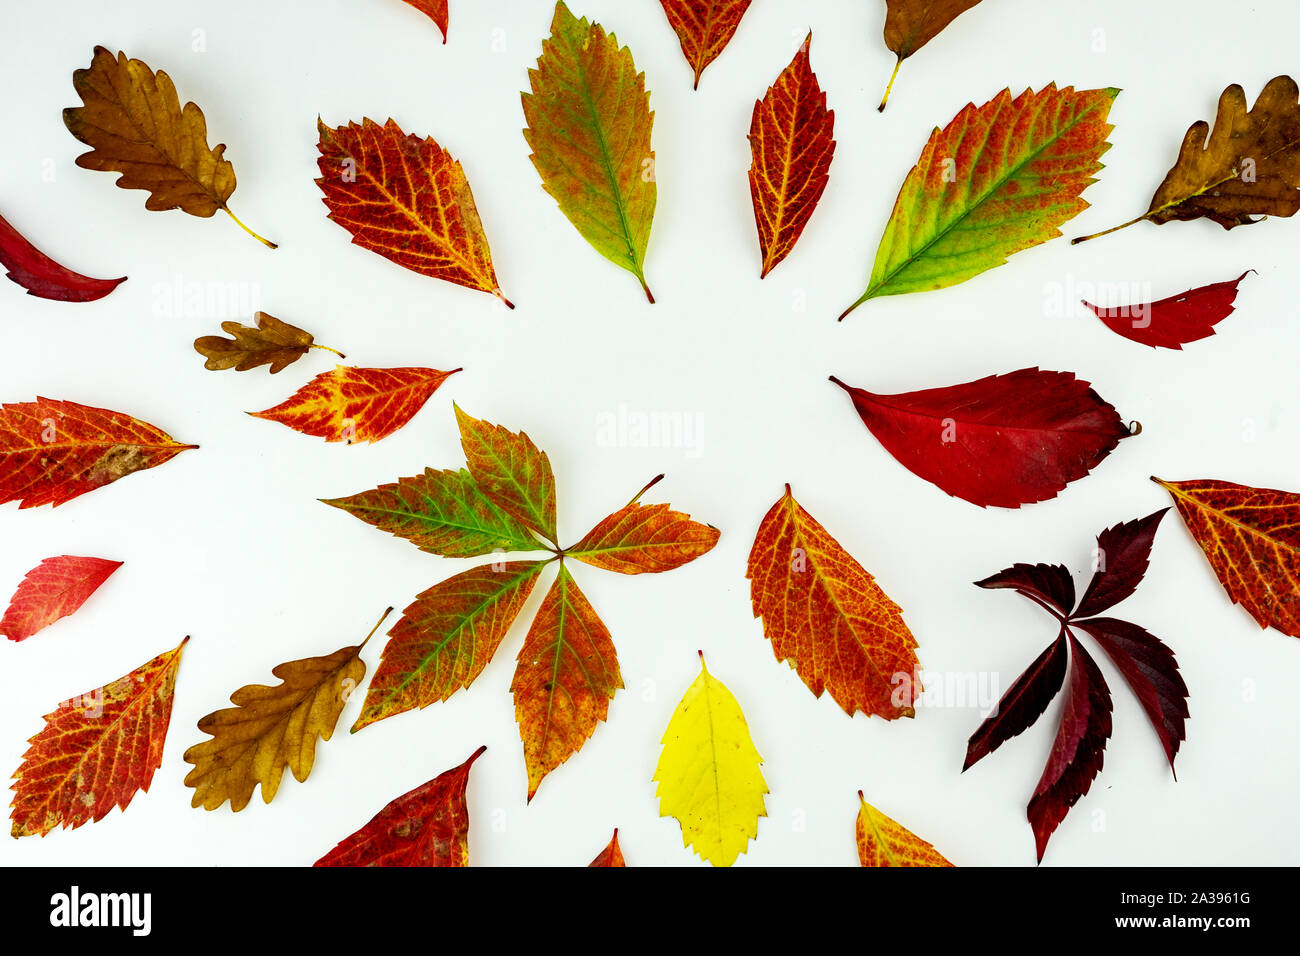 colorful autumn leaves pattern isolated on white background. flat lay, overhead view Stock Photo